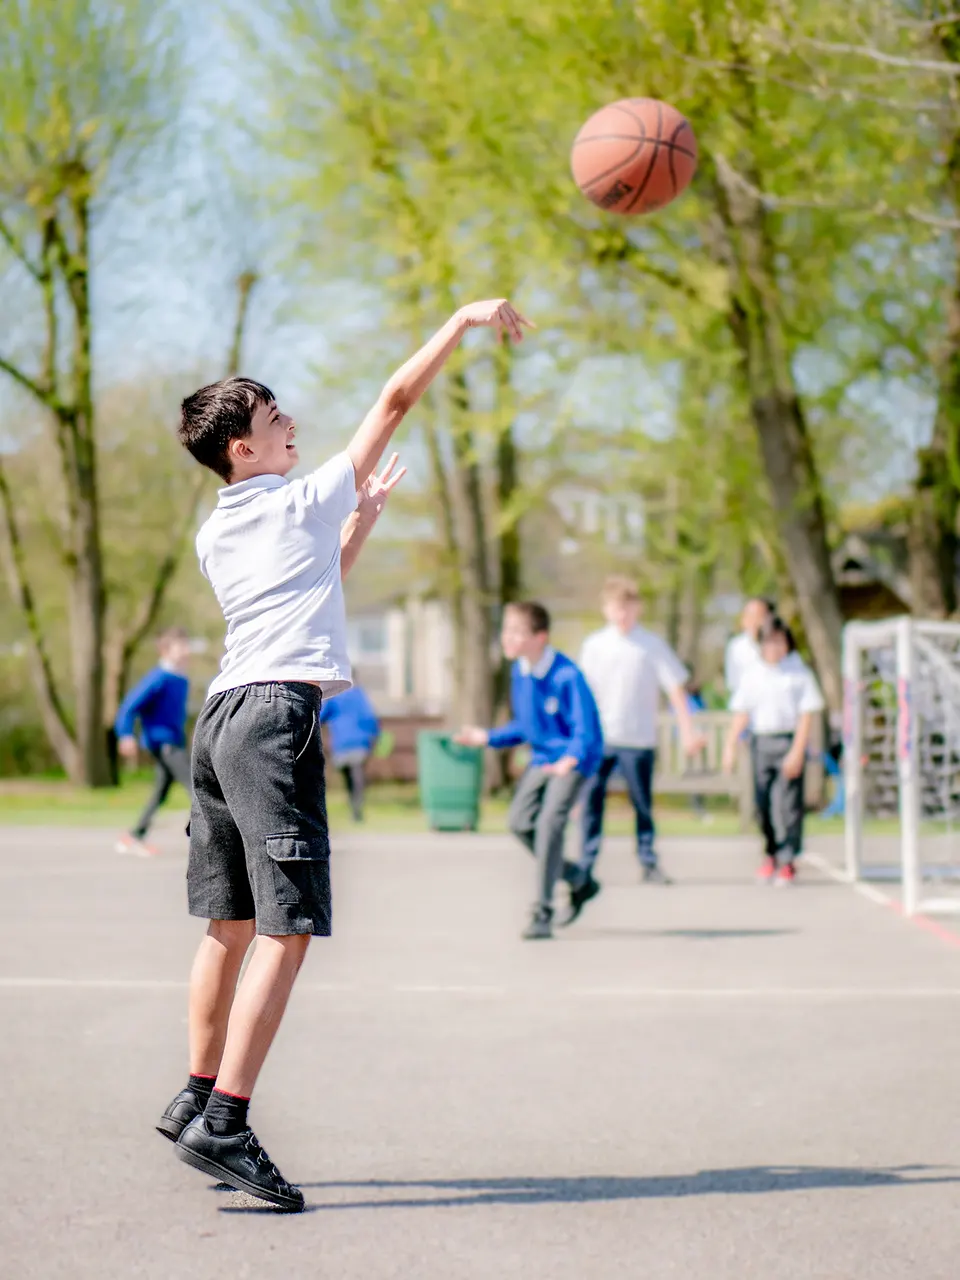 Boy shooting a basketball in playground with children behind playing football